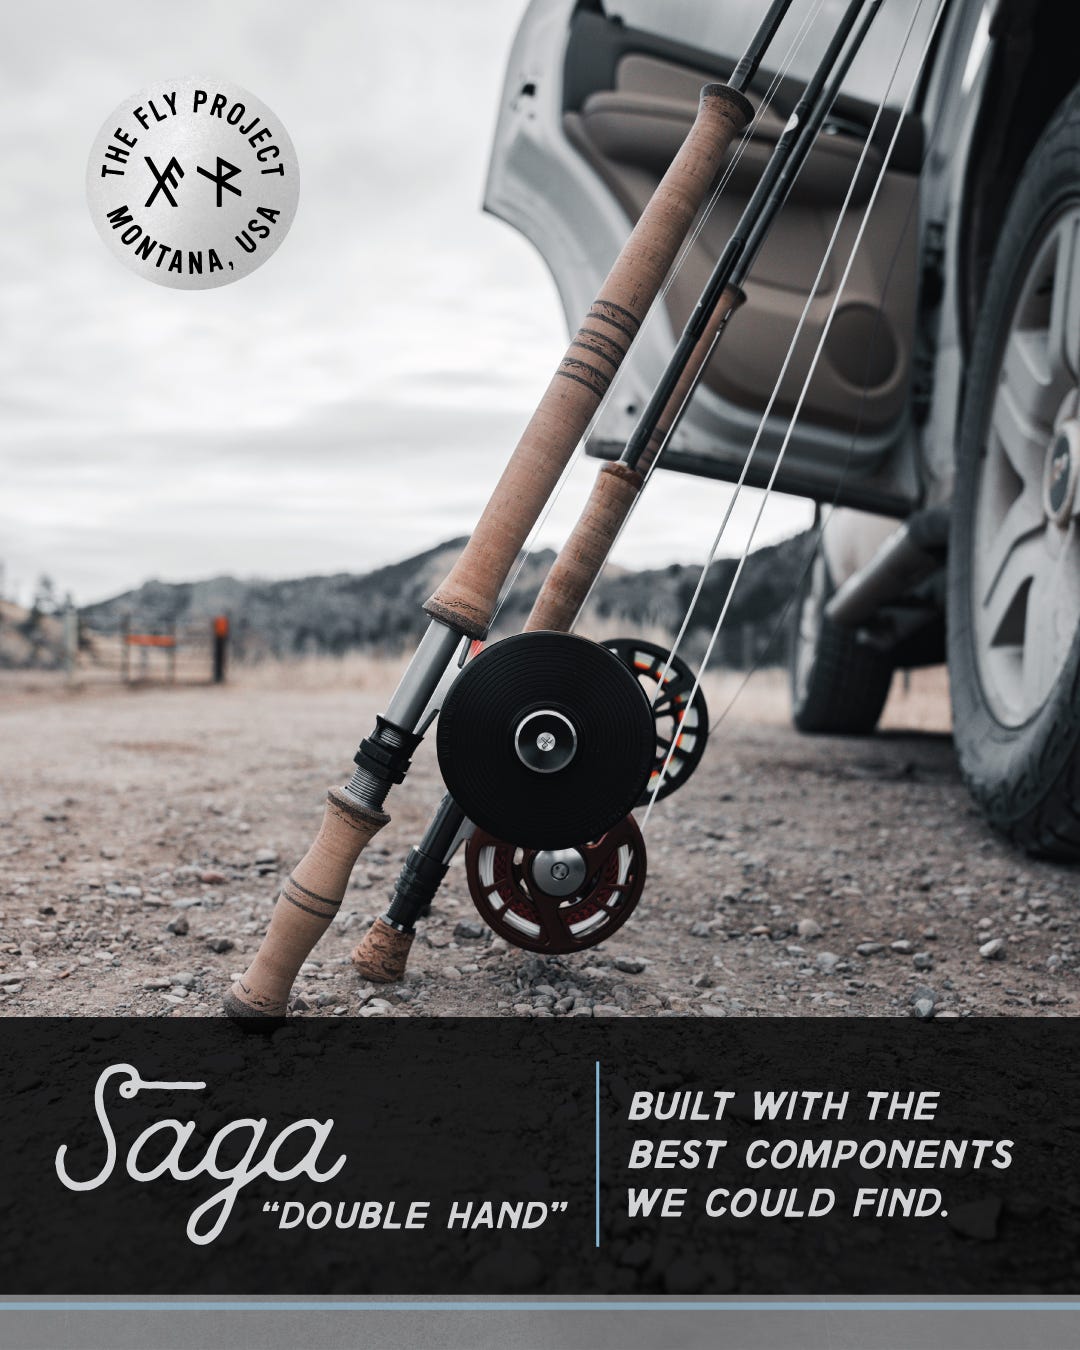 Introducing the Fly Project Saga Double Hand Spey Rod, built with the best components we could find. 